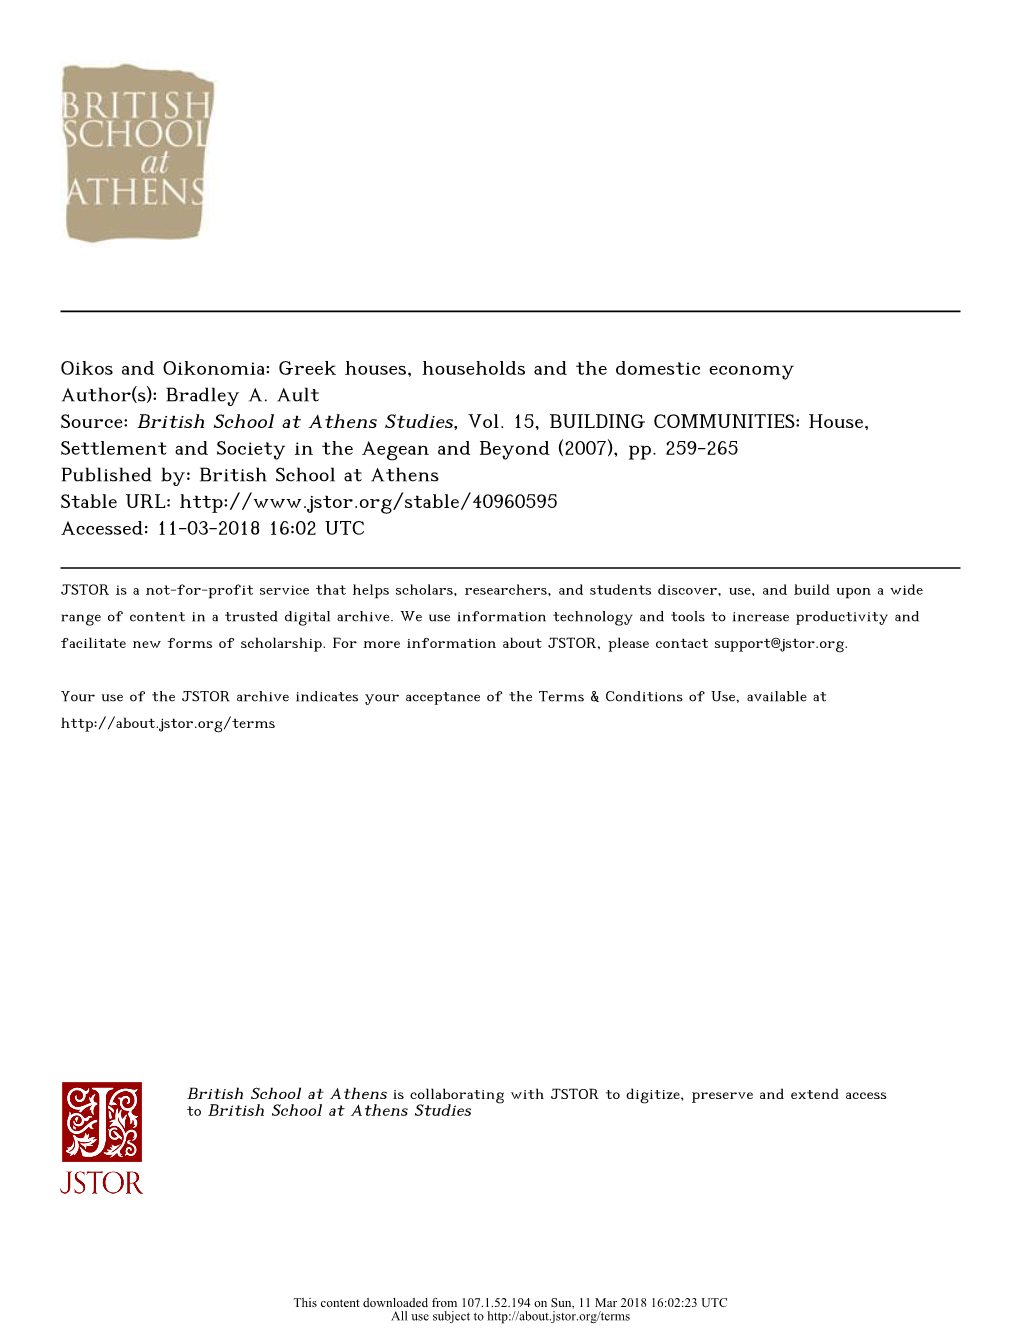 Oikos and Oikonomia: Greek Houses, Households and the Domestic Economy Author(S): Bradley A